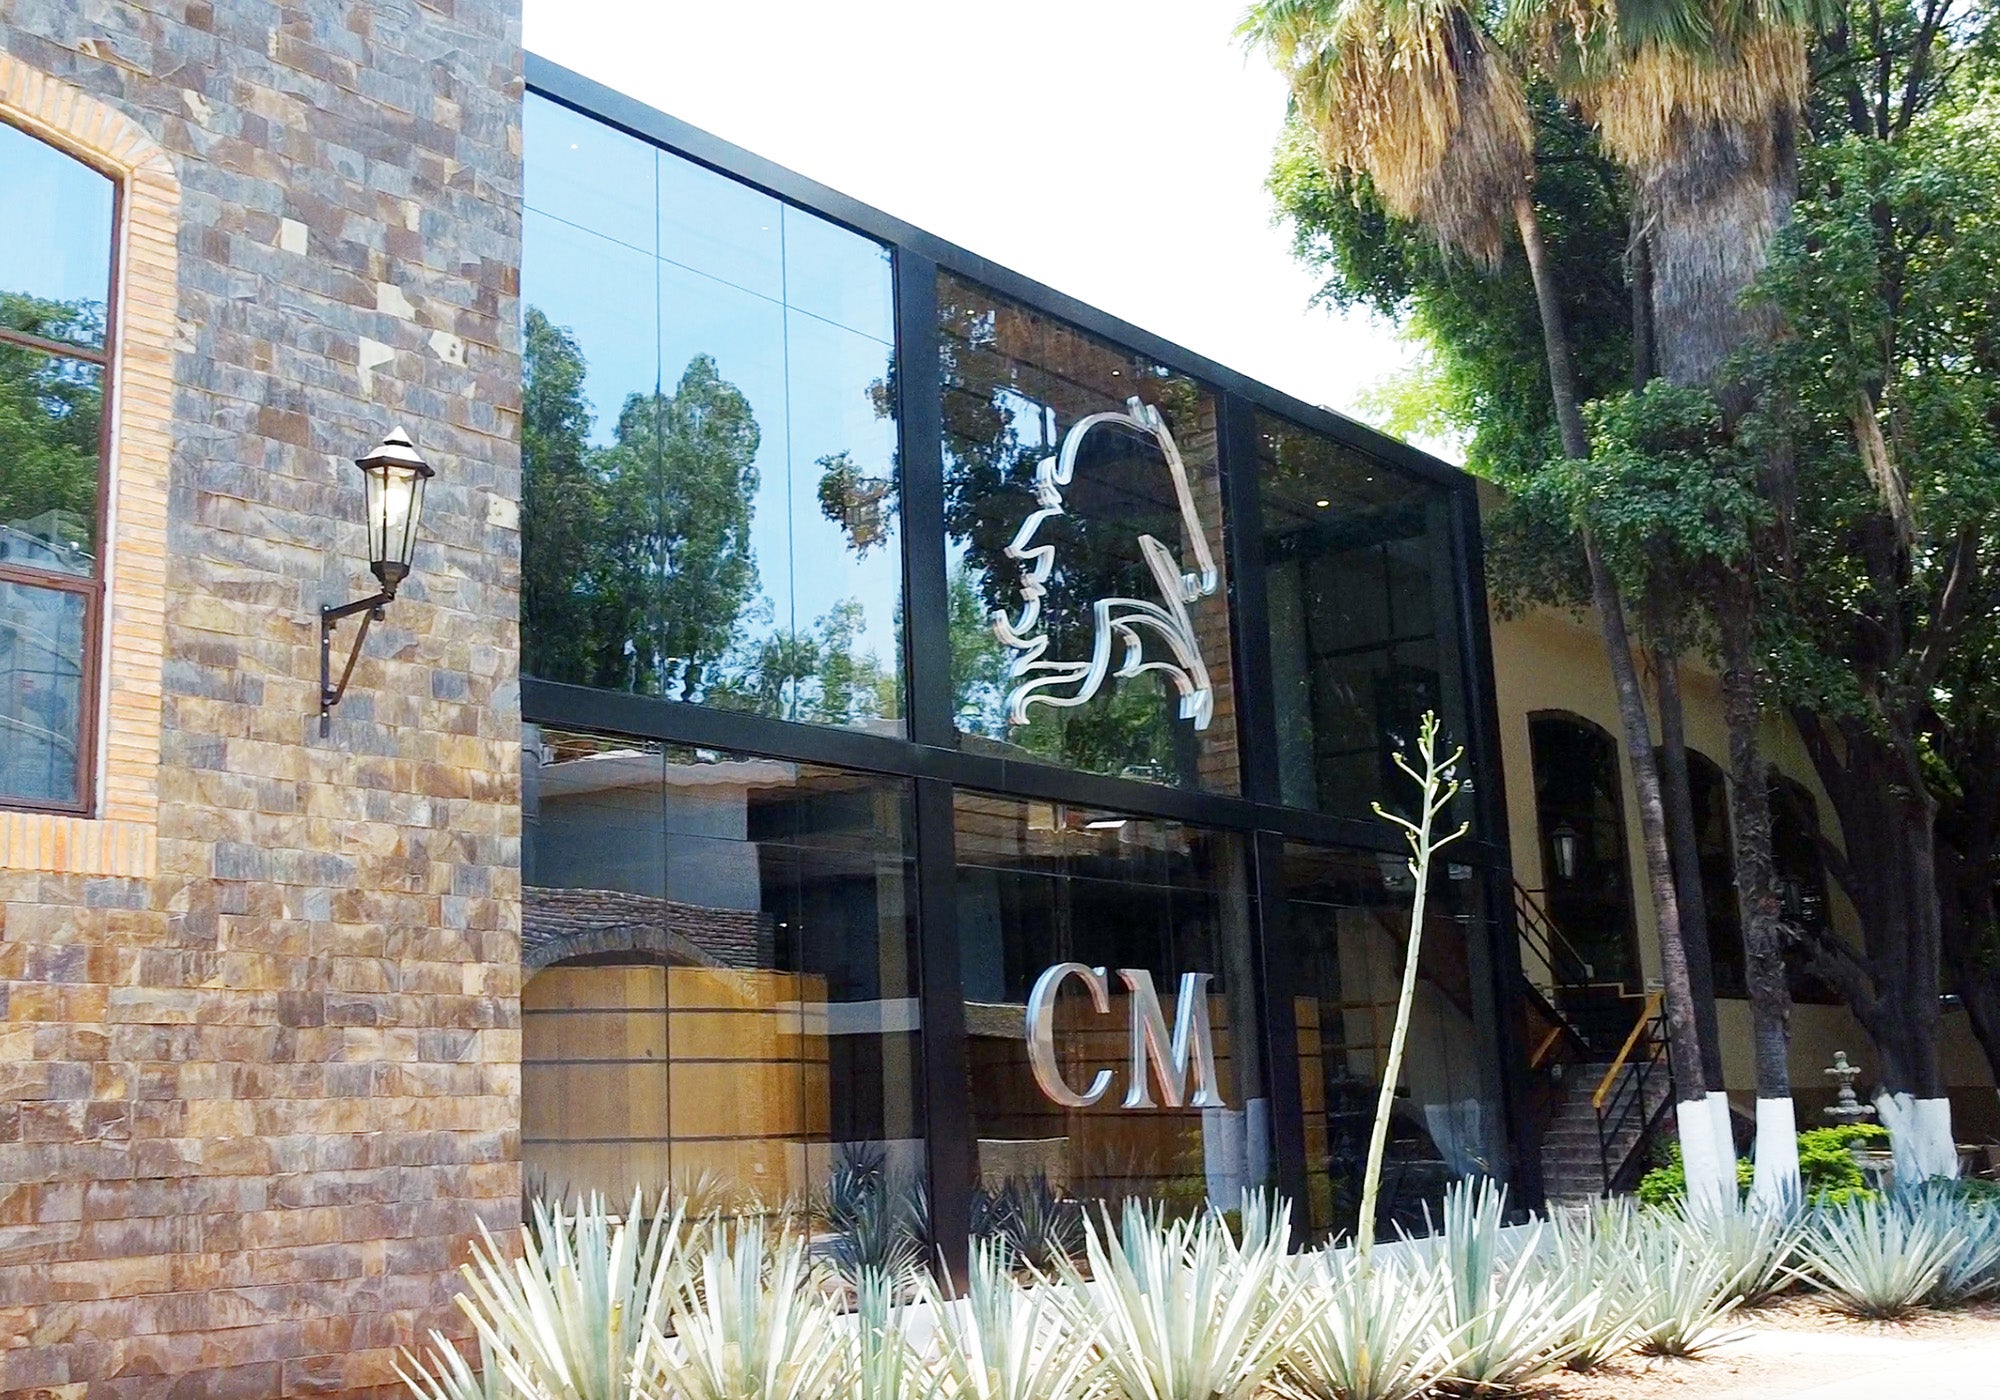 An exterior view of the glass walled tasting room at Casa Maestri distillery in Jalisco, Mexico where VIVIR Tequila is produced. Blue Weber Agave is seen in front of the Casa Maestri logo.